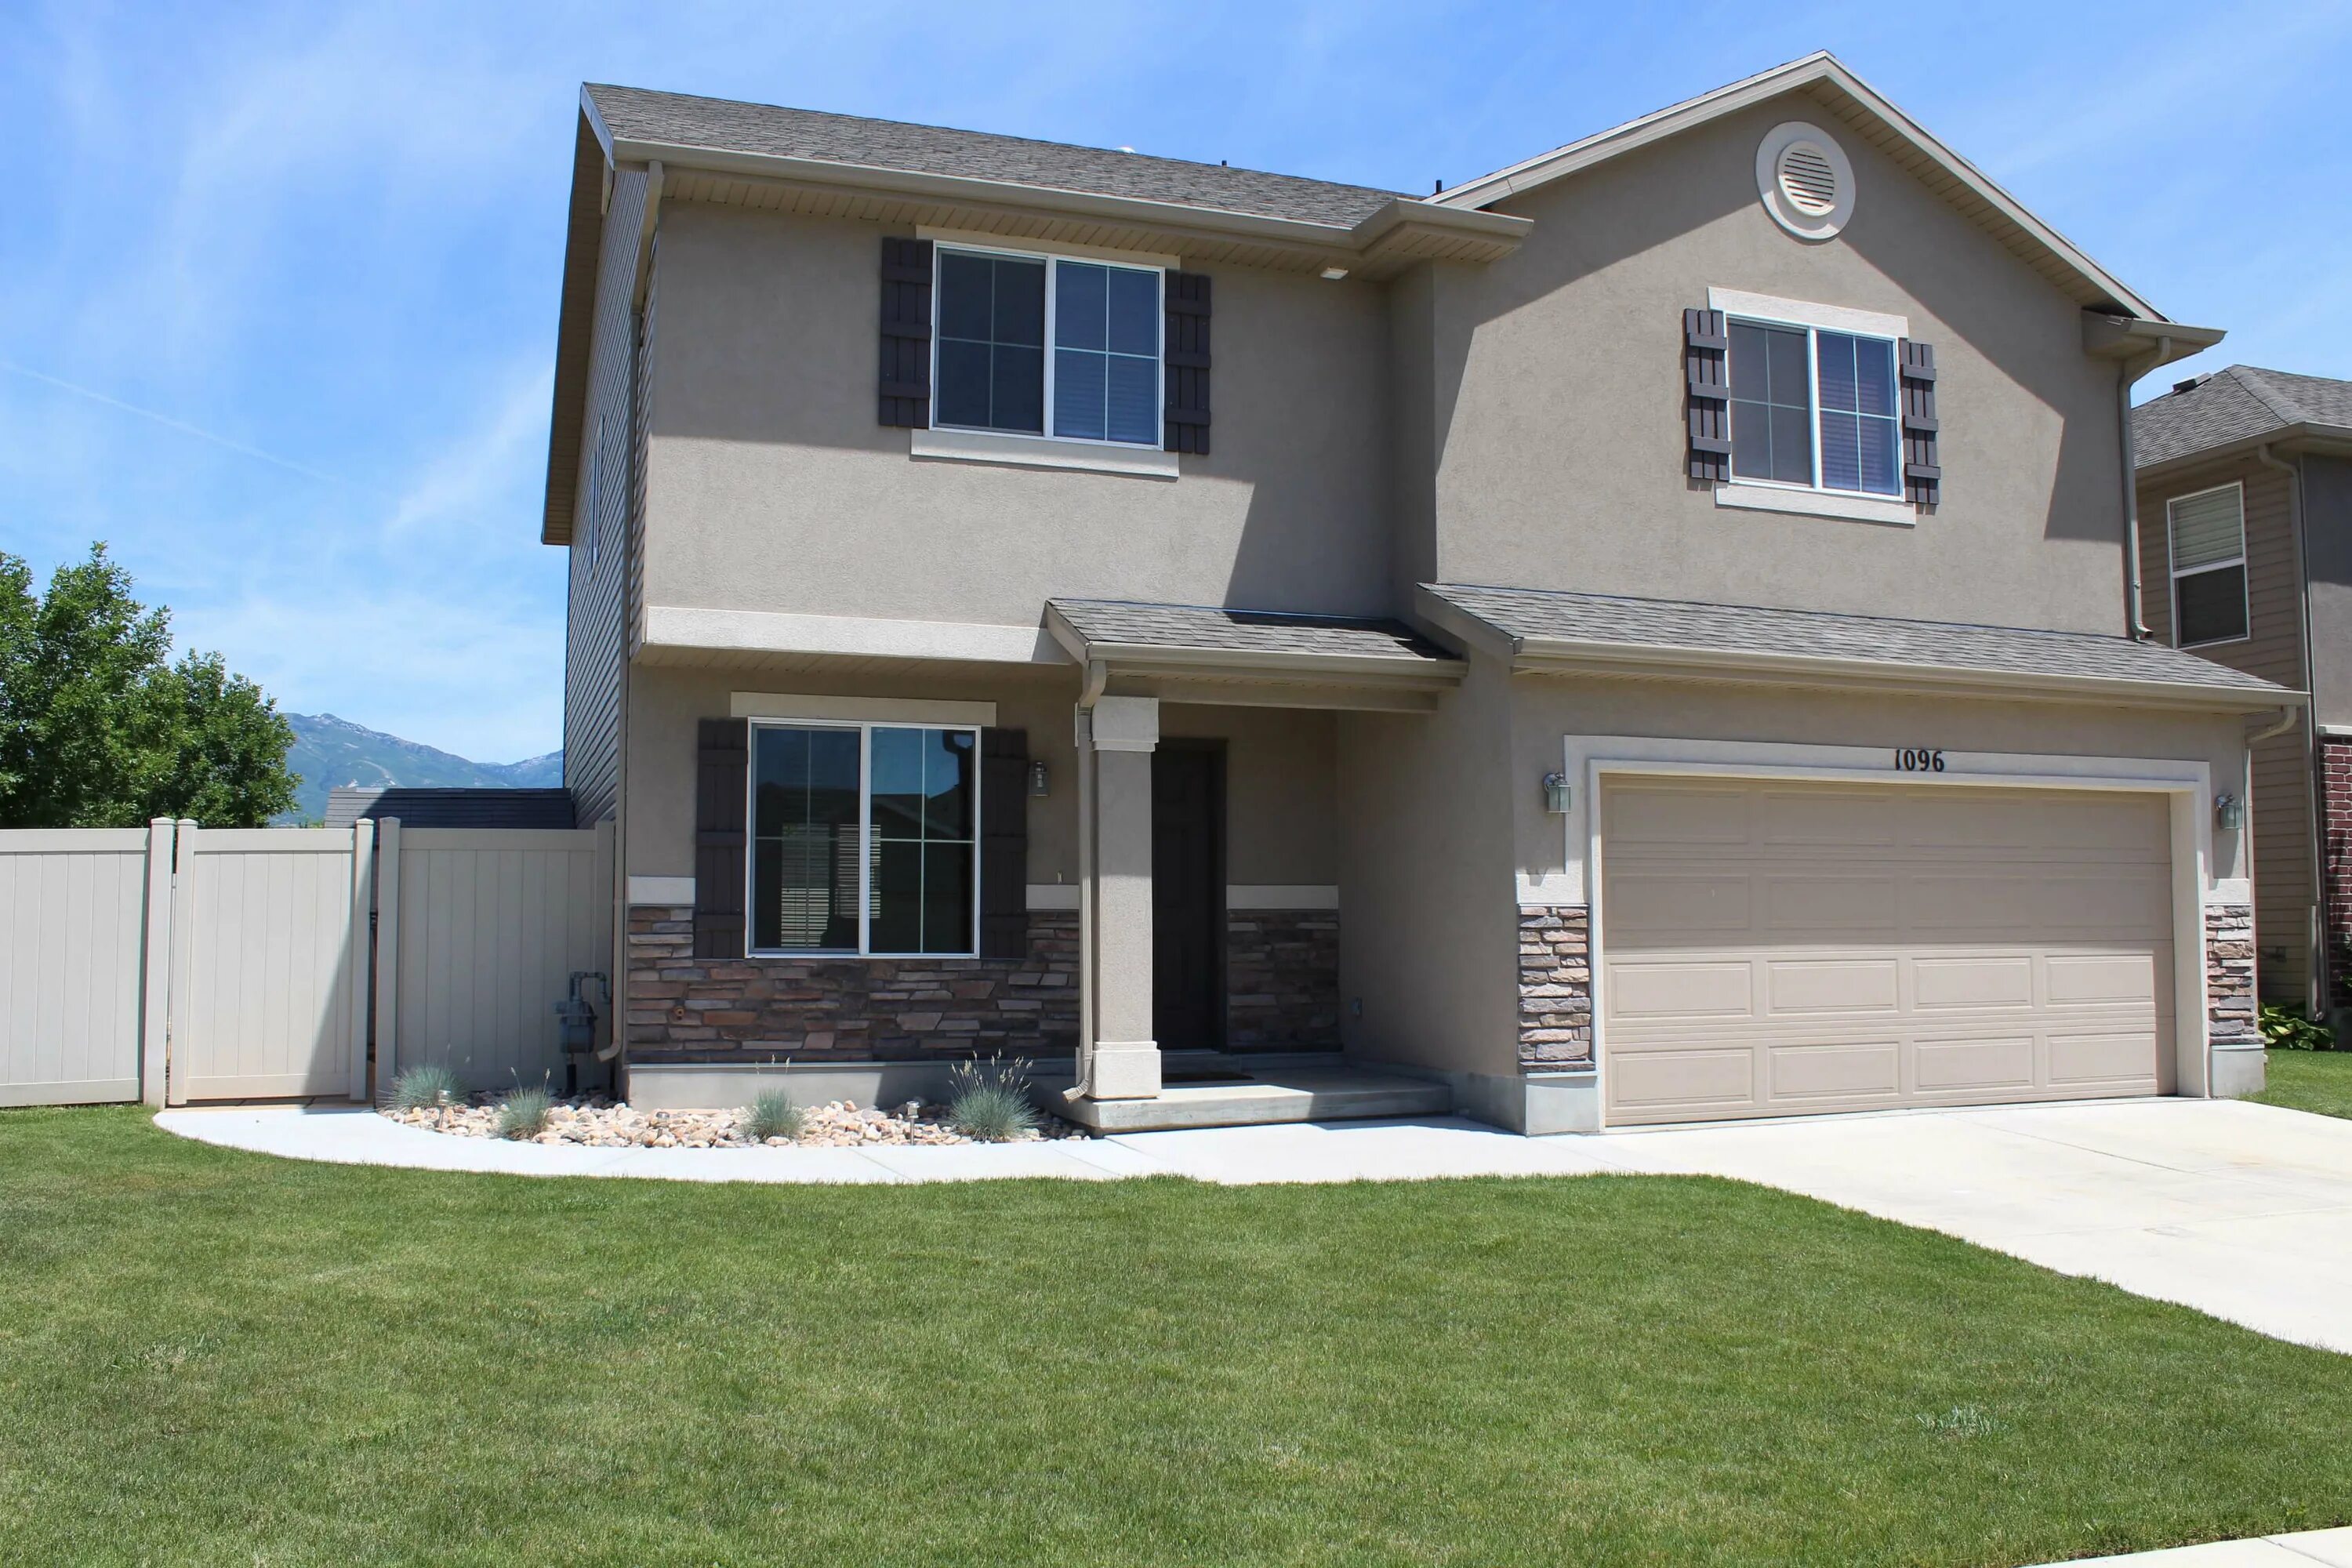 Single Family Home. Houses in Utah. House for rent. Typical Single Family House.